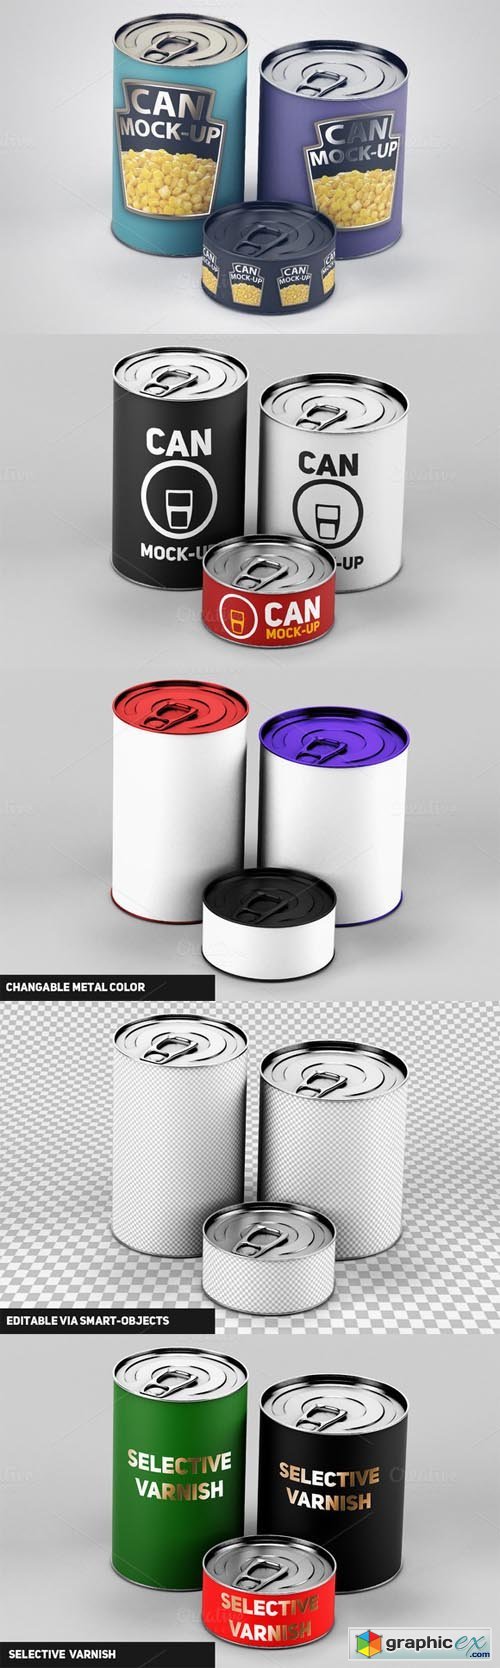 Cans Mock-Up 514948